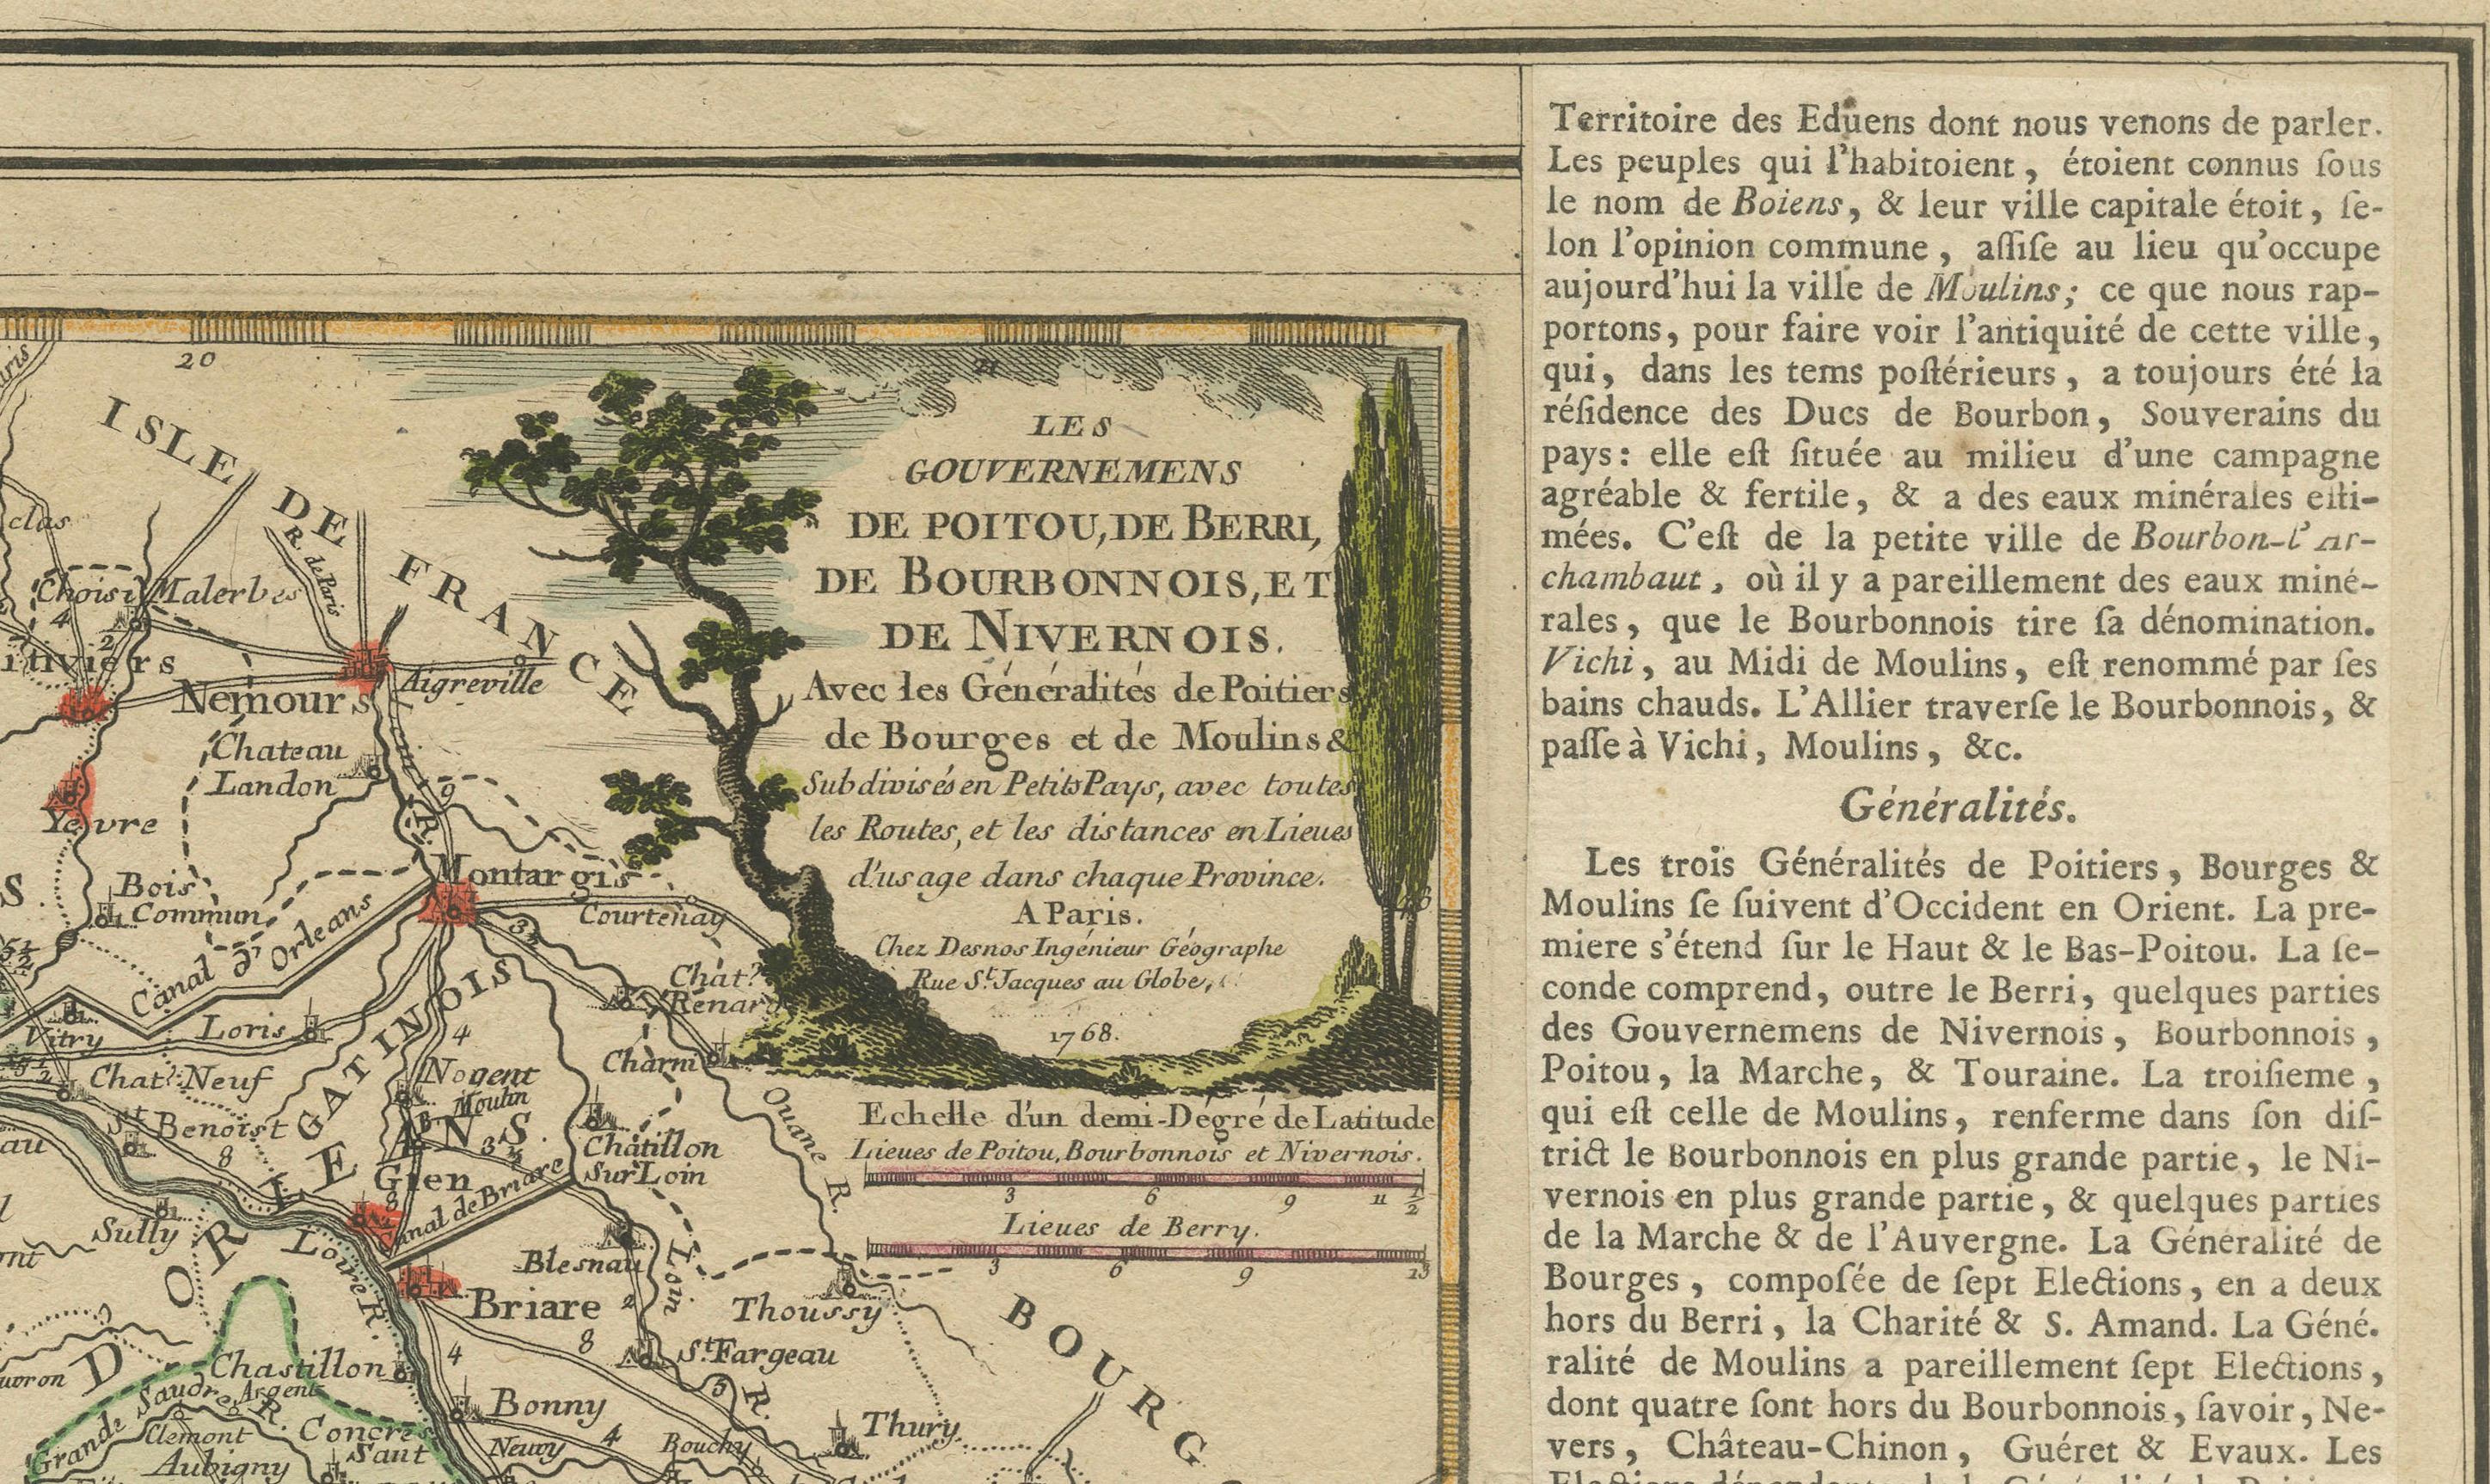 Old Map of Part of France: Poitou, Berry, Bourbonnais, and Nivernais in 1768 In Good Condition For Sale In Langweer, NL